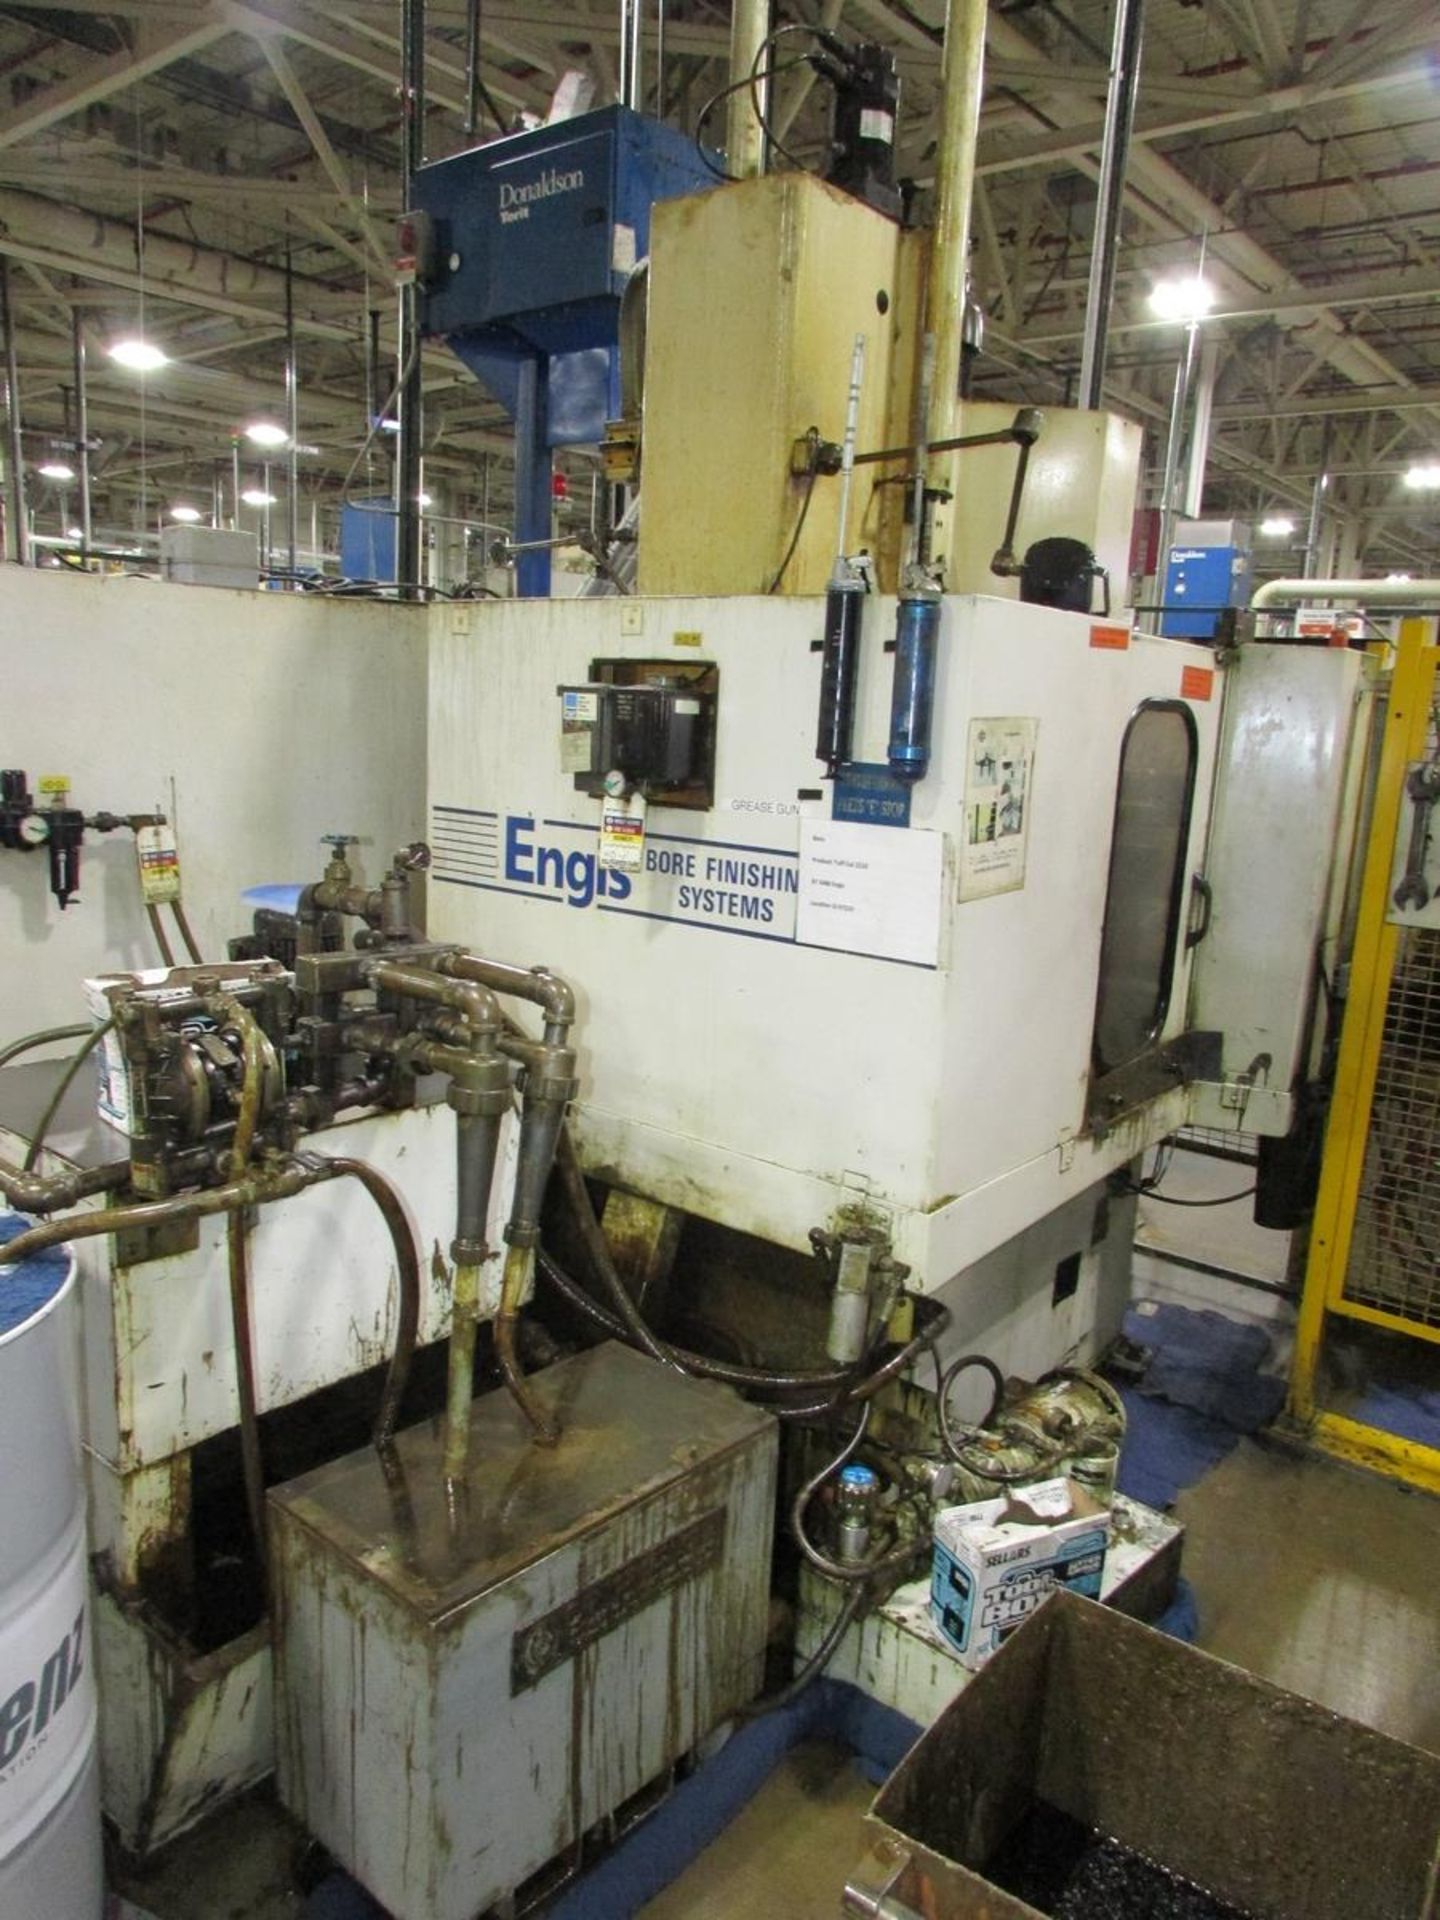 Universal Automatic Machine/ Engis Bore Finishing Systems 9825 16S 6-Spindle Single Column Vertical - Image 13 of 17